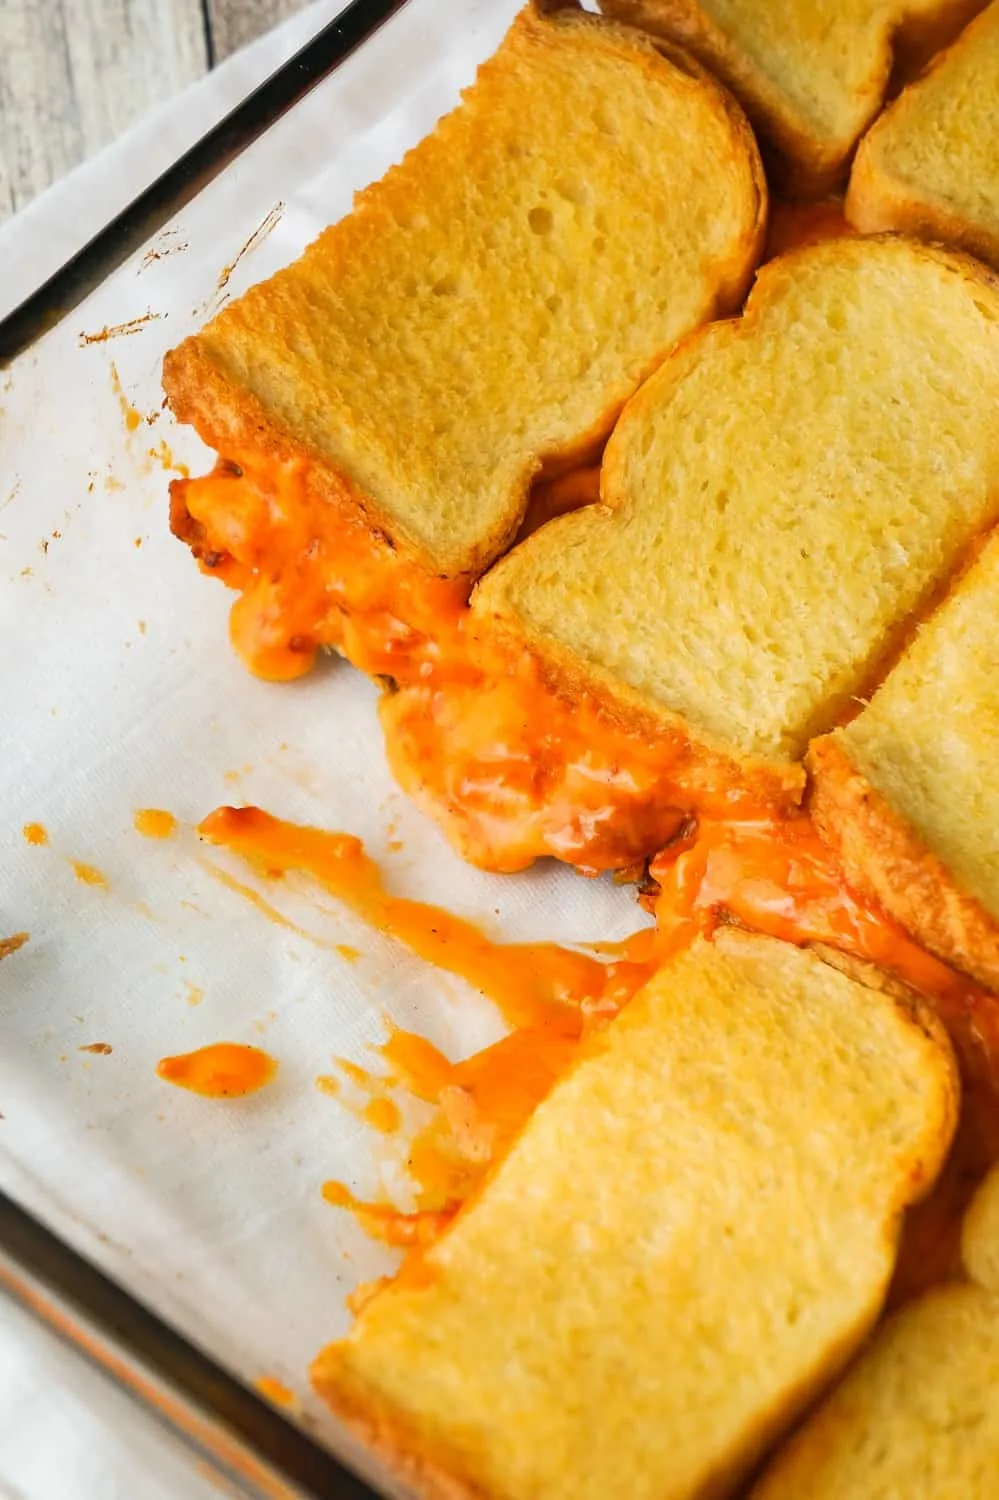 Tomato Soup & Bacon Grilled Cheese Casserole is an easy lunch or dinner recipe the whole family will love. This easy casserole is loaded with shredded cheddar cheese, real bacon bits and condensed tomato soup, all sandwiched between two layers of bread.